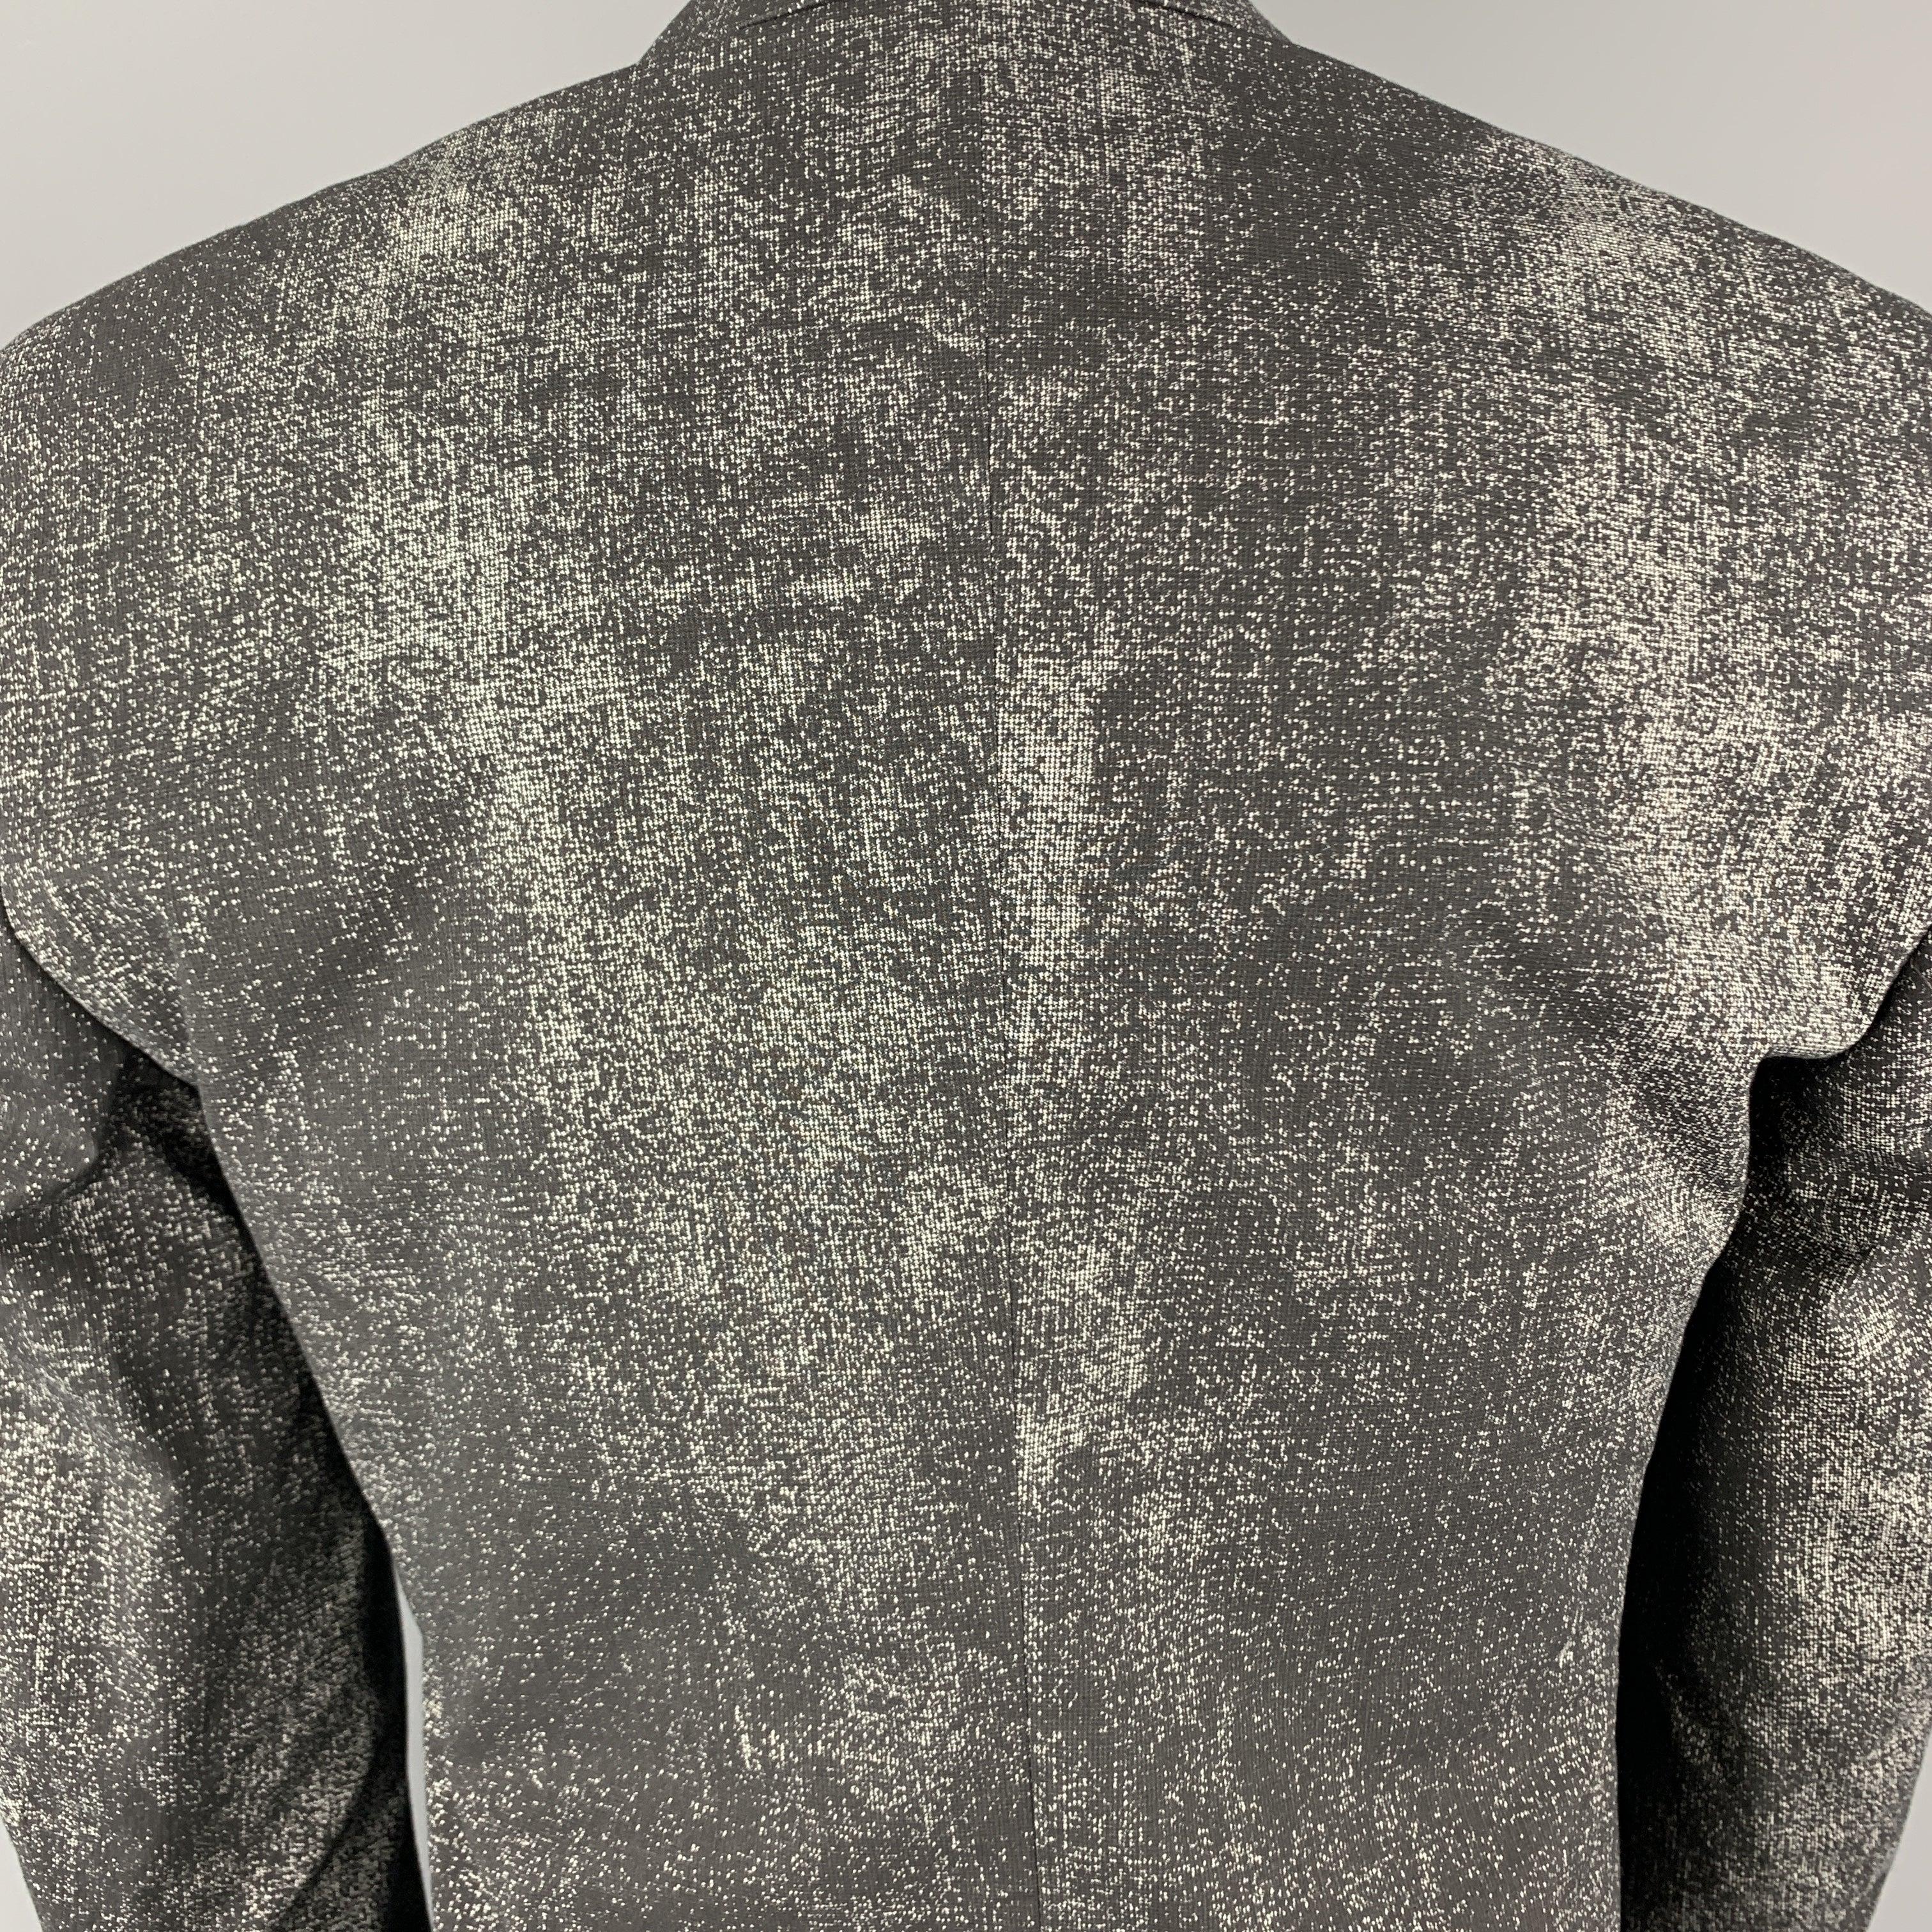 CALVIN KLEIN COLLECTION Size 36 Black & Grey Distressed Print Sport Coat For Sale 3